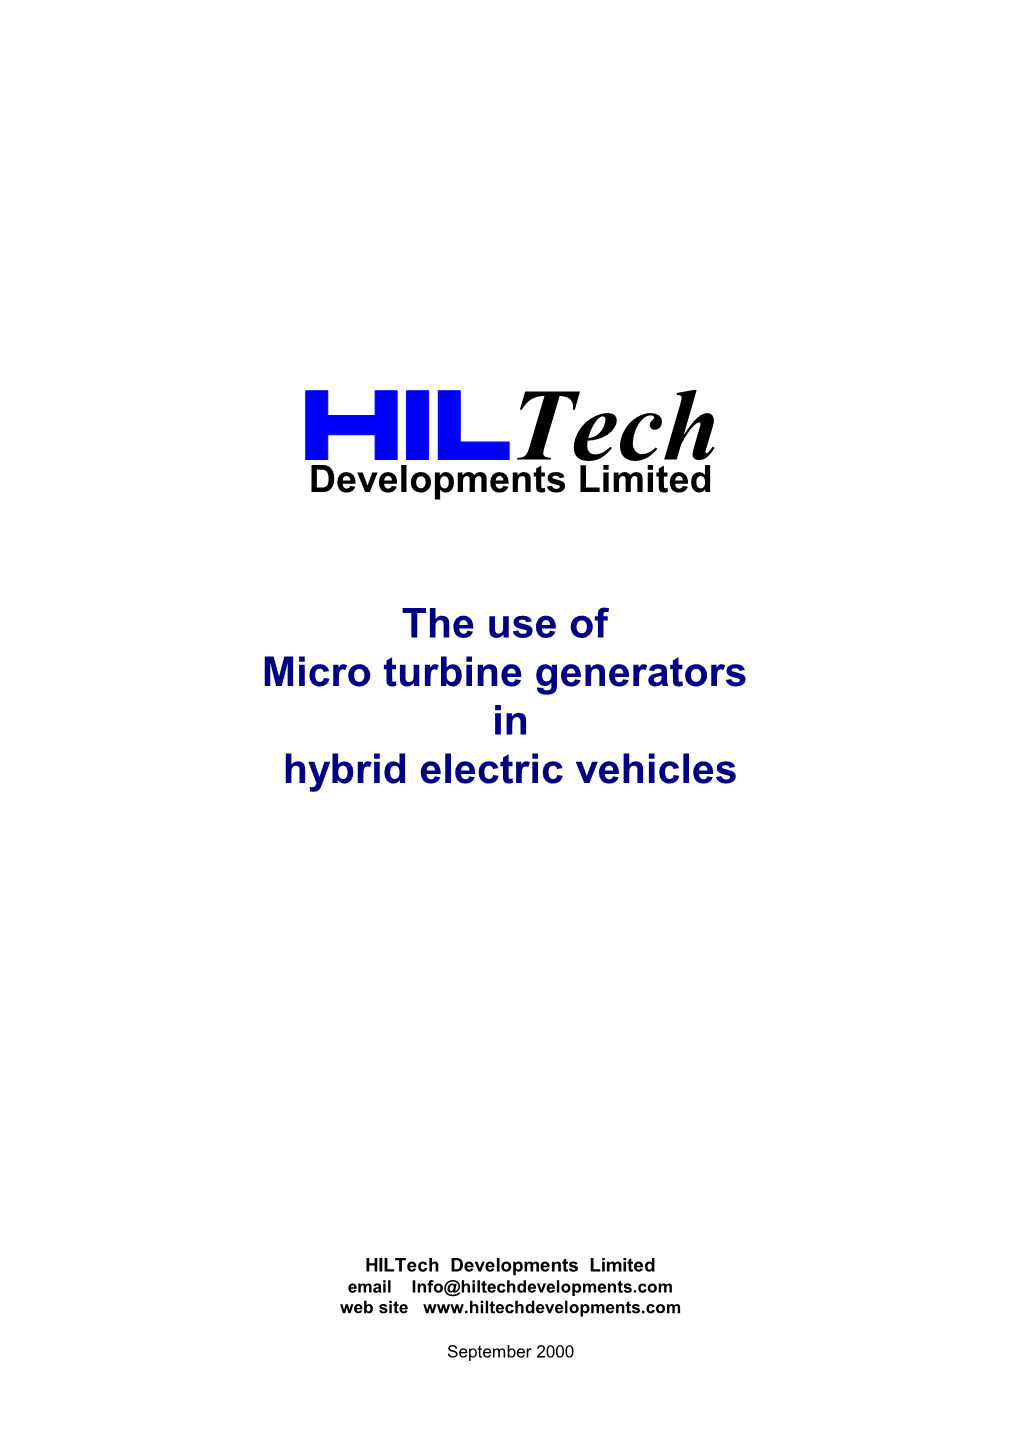 The Use of Microturbine Generators in Hybrid Electric Vehicles